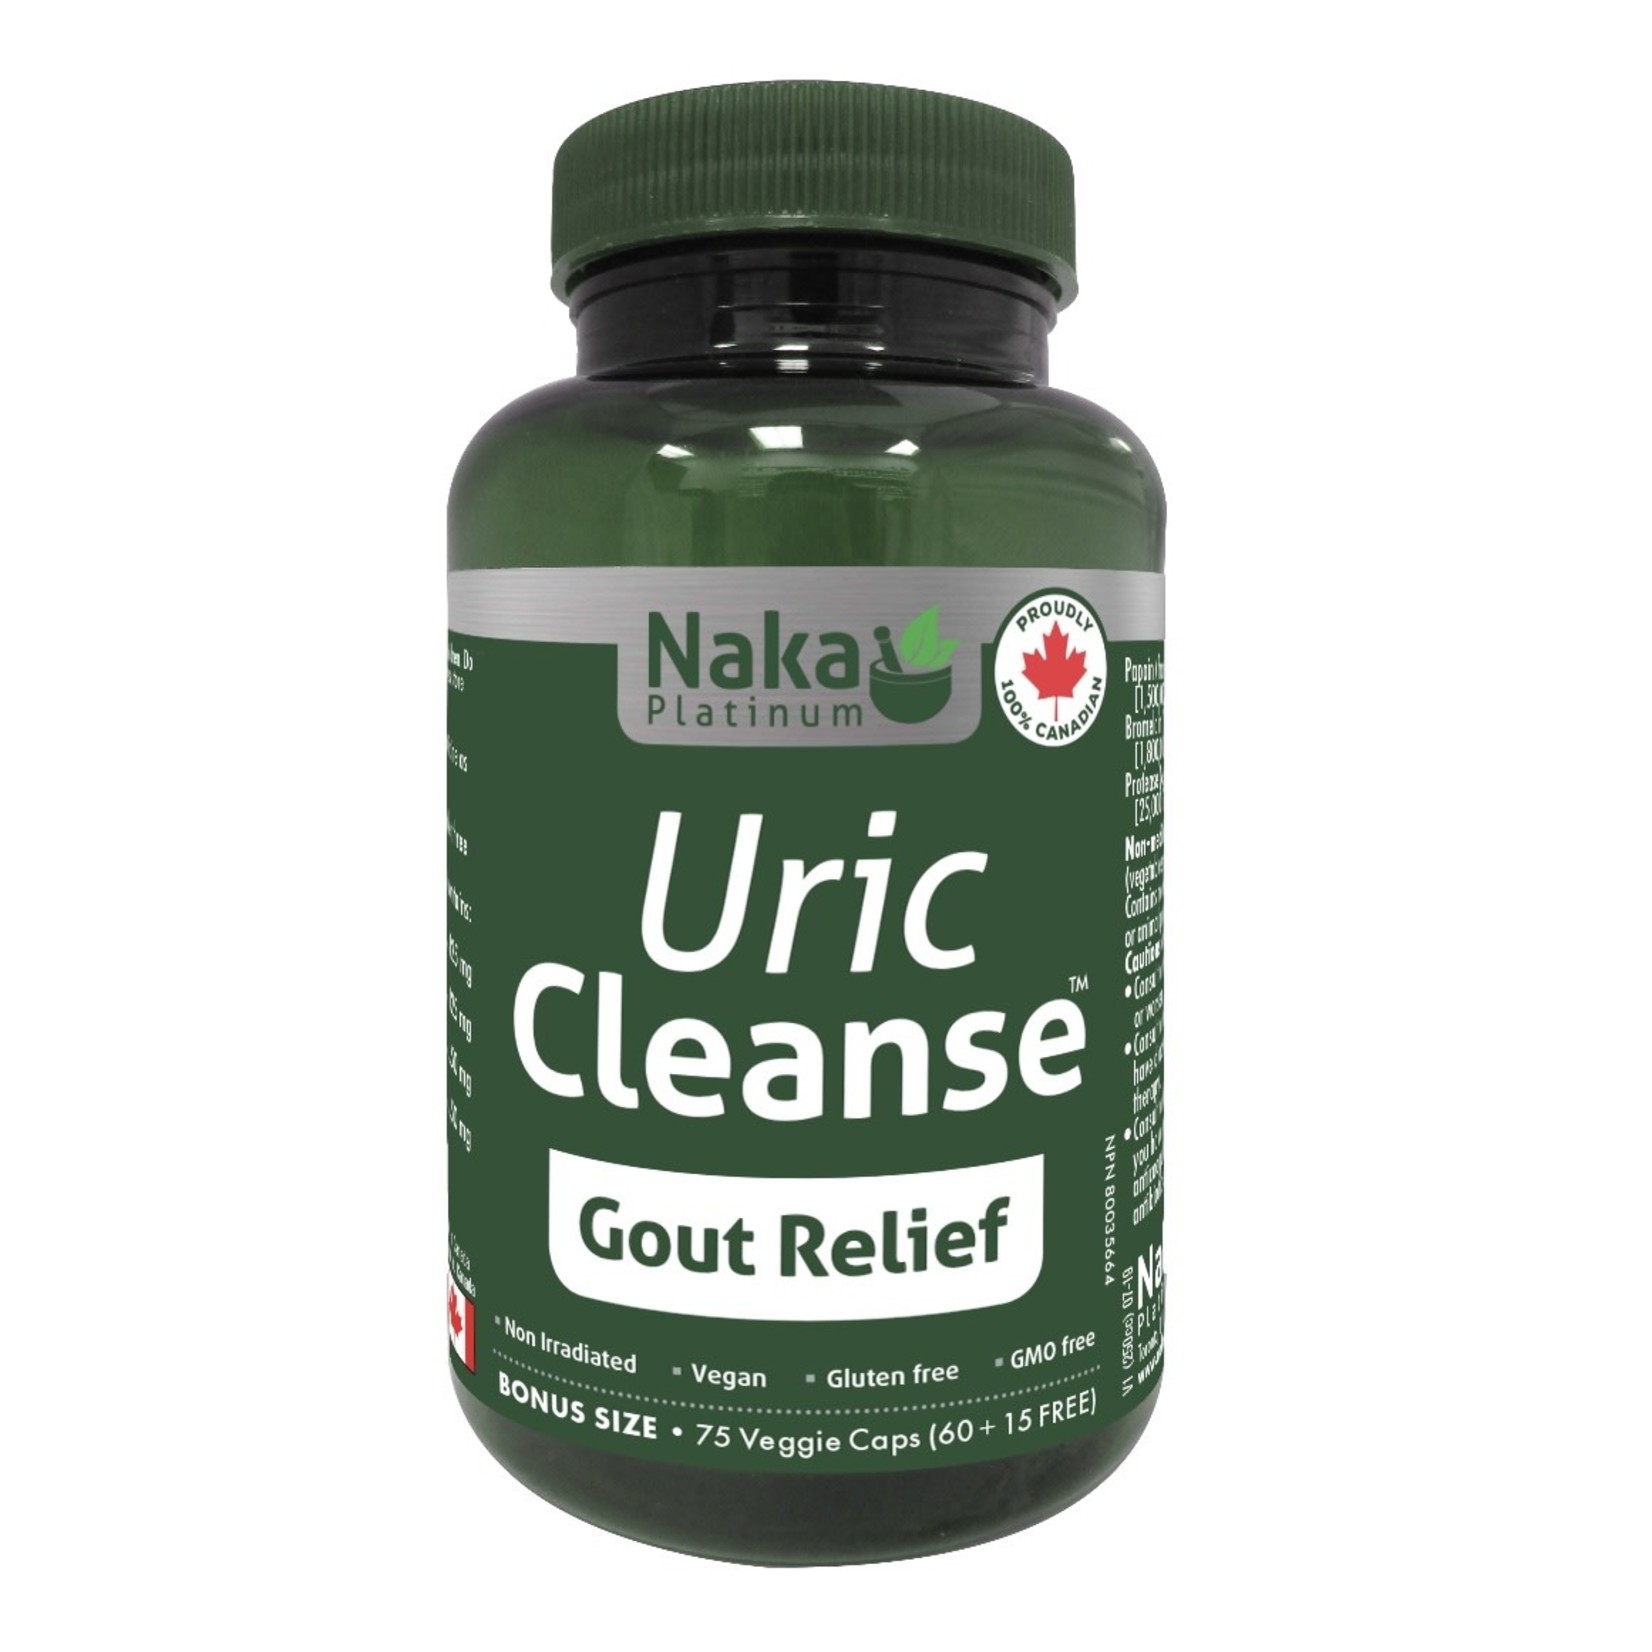 Naka Naka Uric Cleanse Gout Relief 60 caps